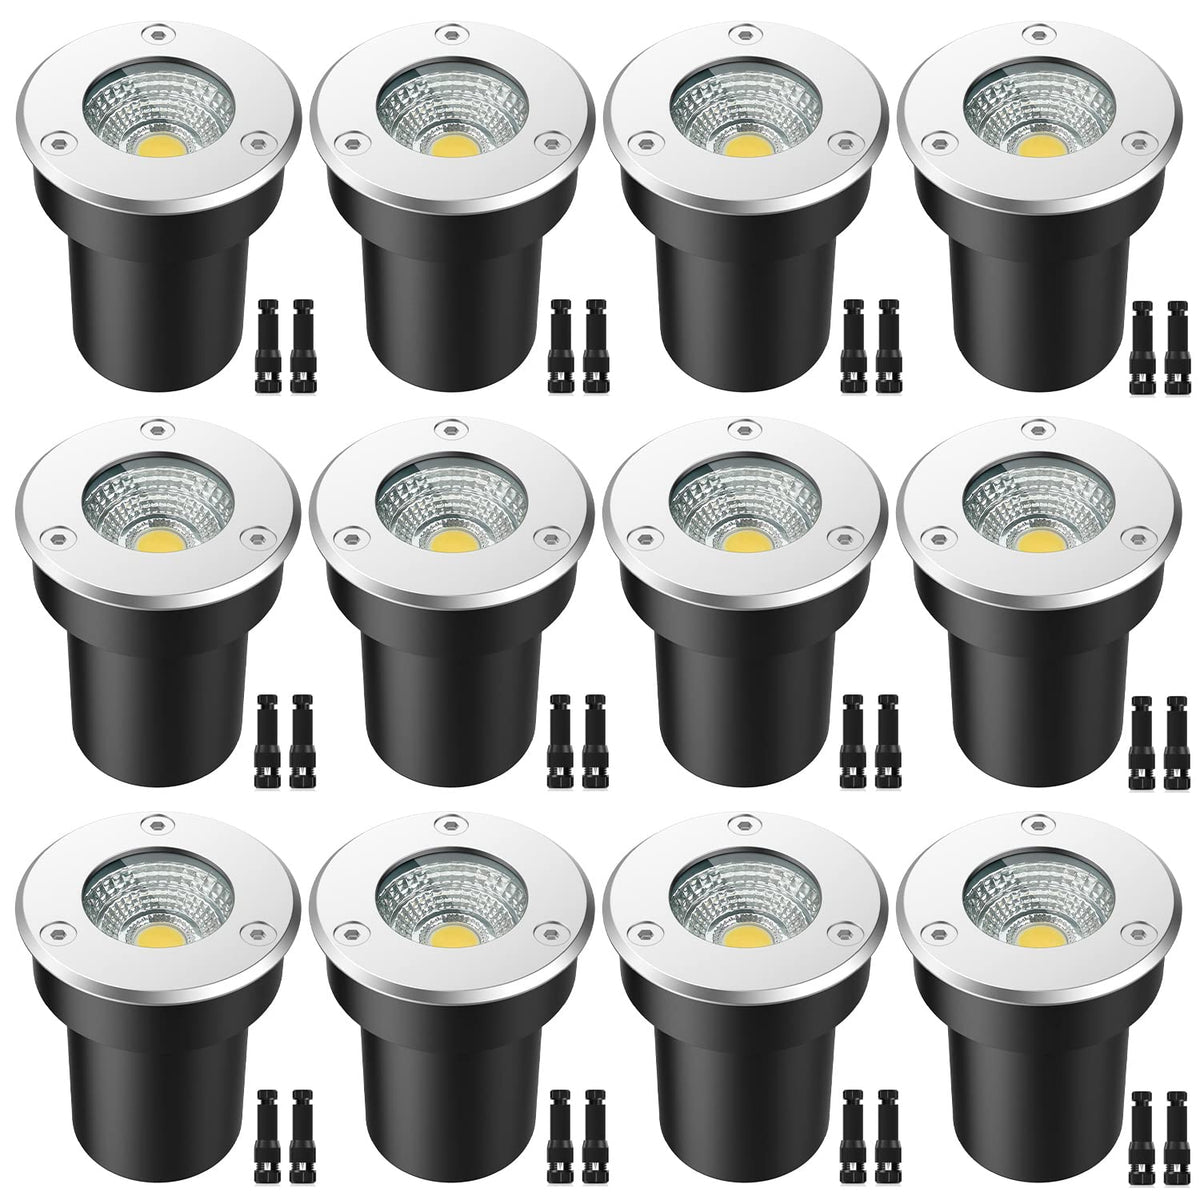 LEDVIE LED Landscape Lights, 12 Pack 7W LED Ground Lights with 24  Connectors Low Voltage In Ground Well Lights Pathway Lights Warm White,  Waterproof